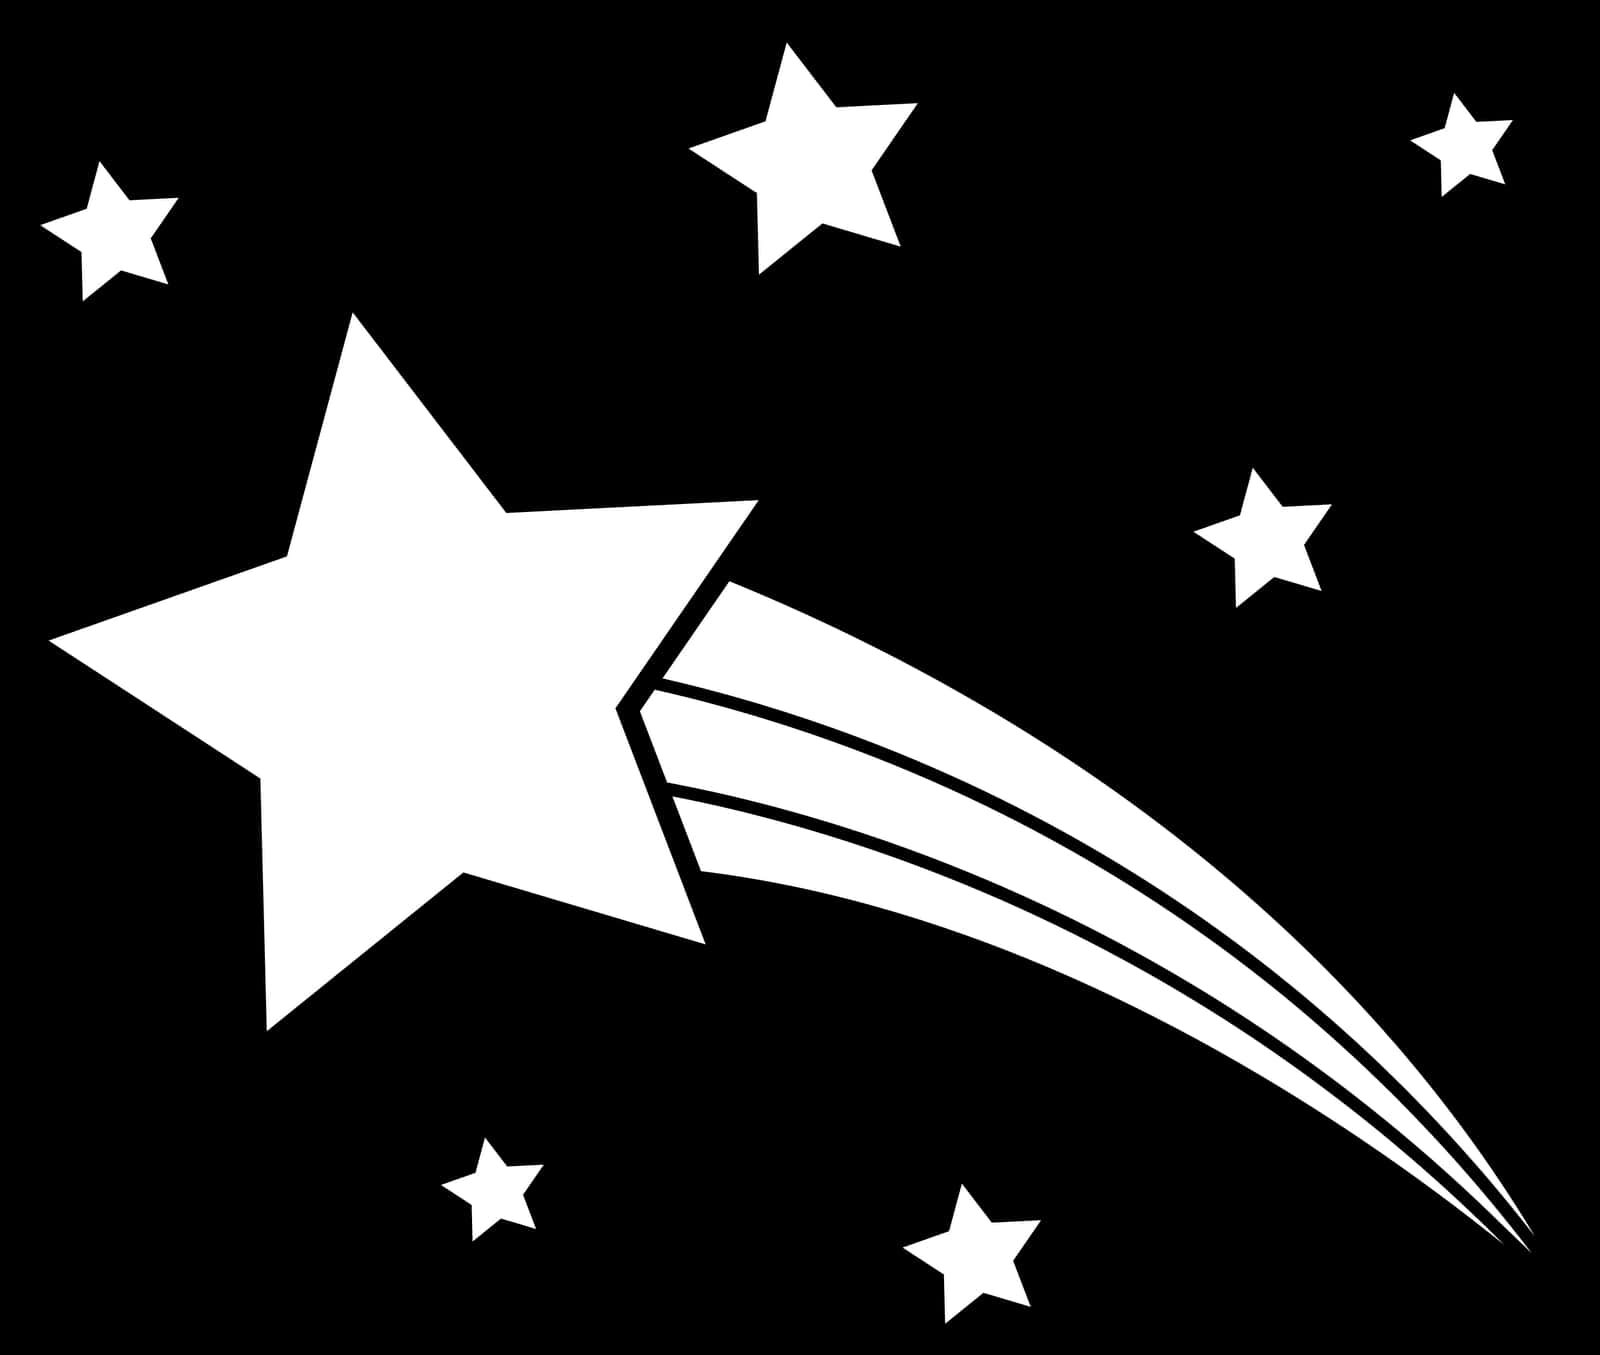 Stylized Shooting Star Graphic PNG